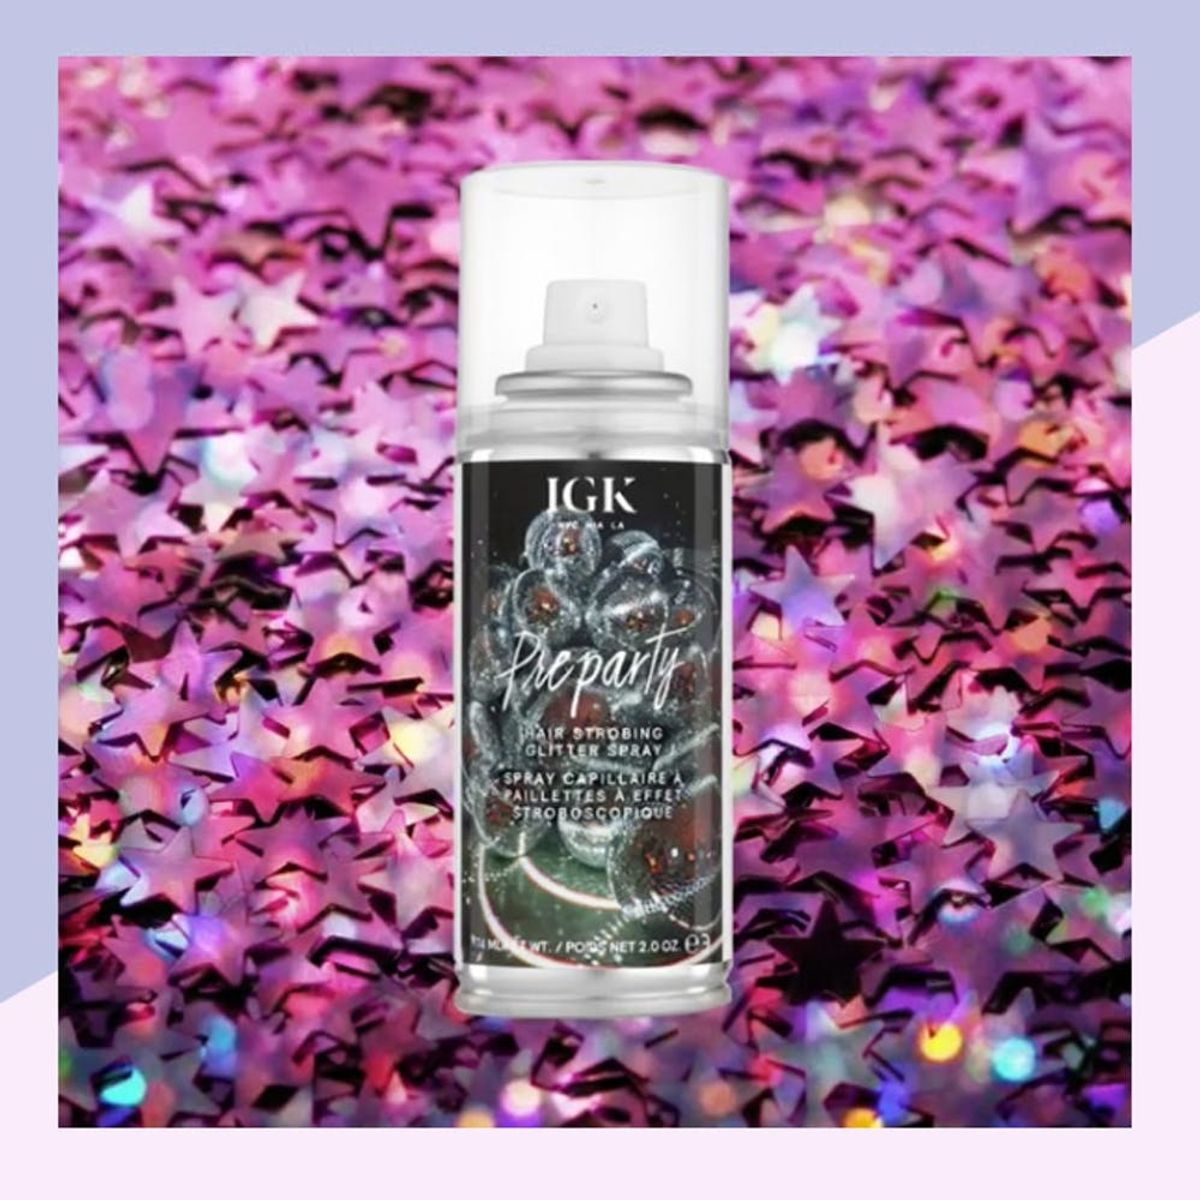 This Sold-Out Hair Glitter Spray Is Back Just in Time for Halloween